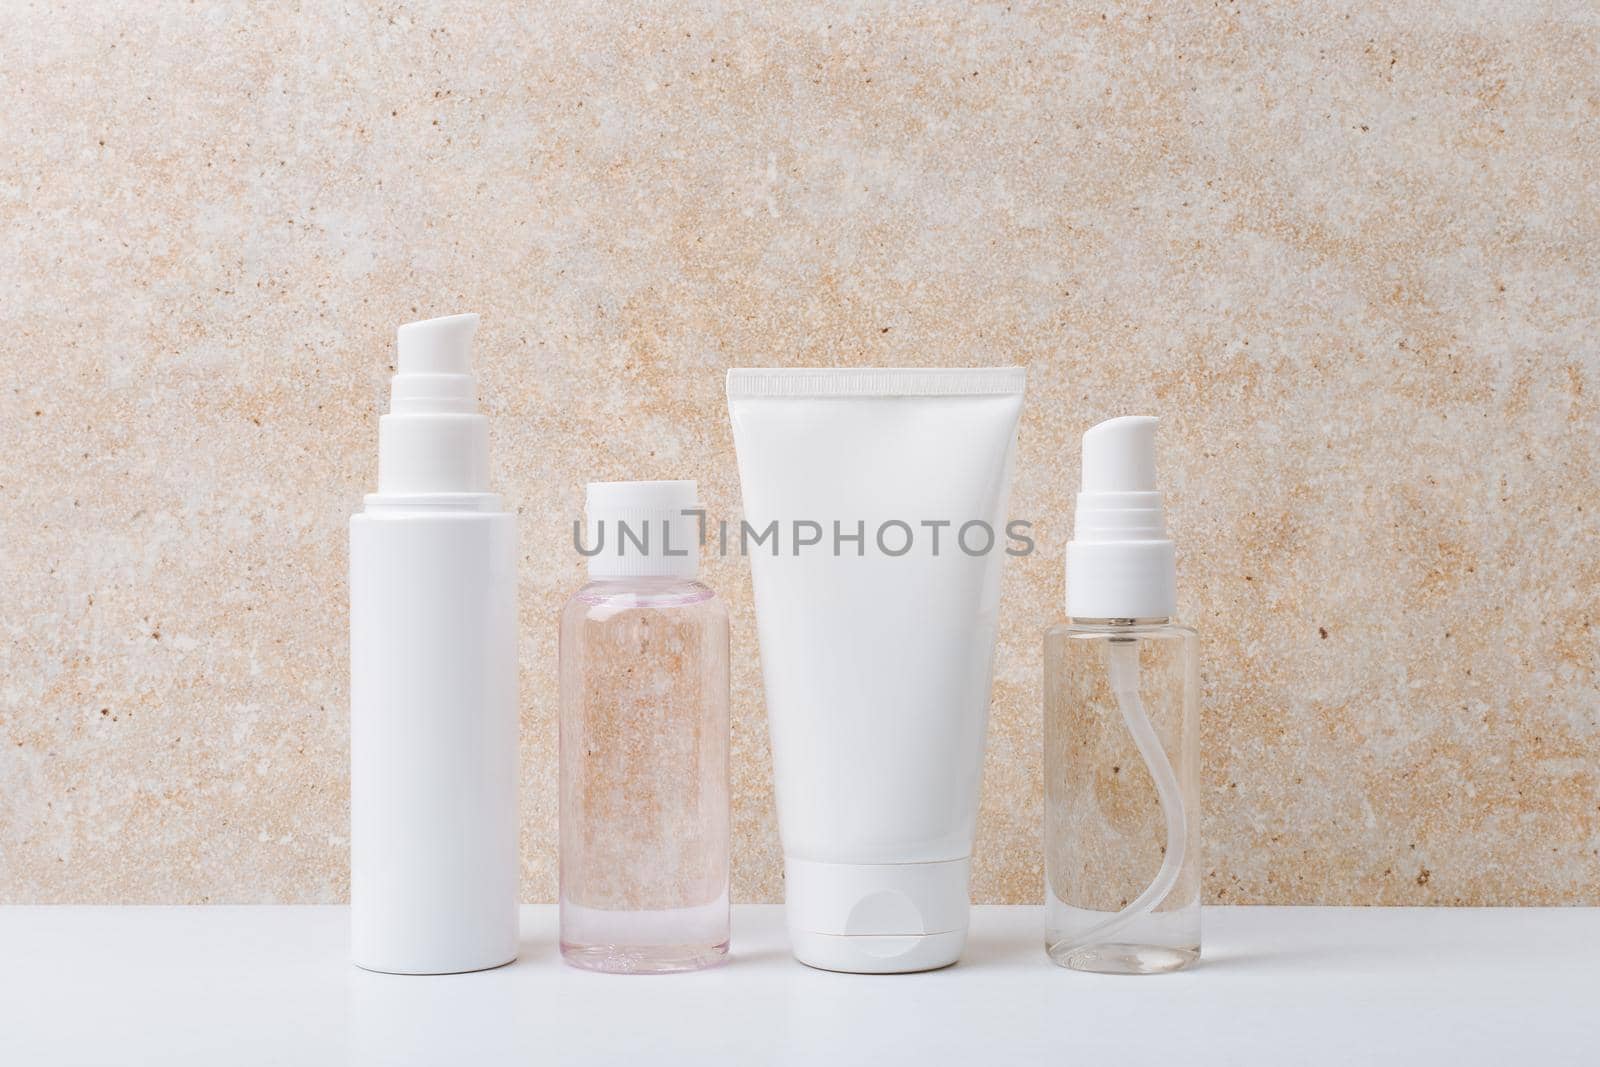 Still life with a set of cosmetic products for daily skin care on white table against beige marble background. Face cream, cleaning foam, lotion and hands cream in unbranded bottles